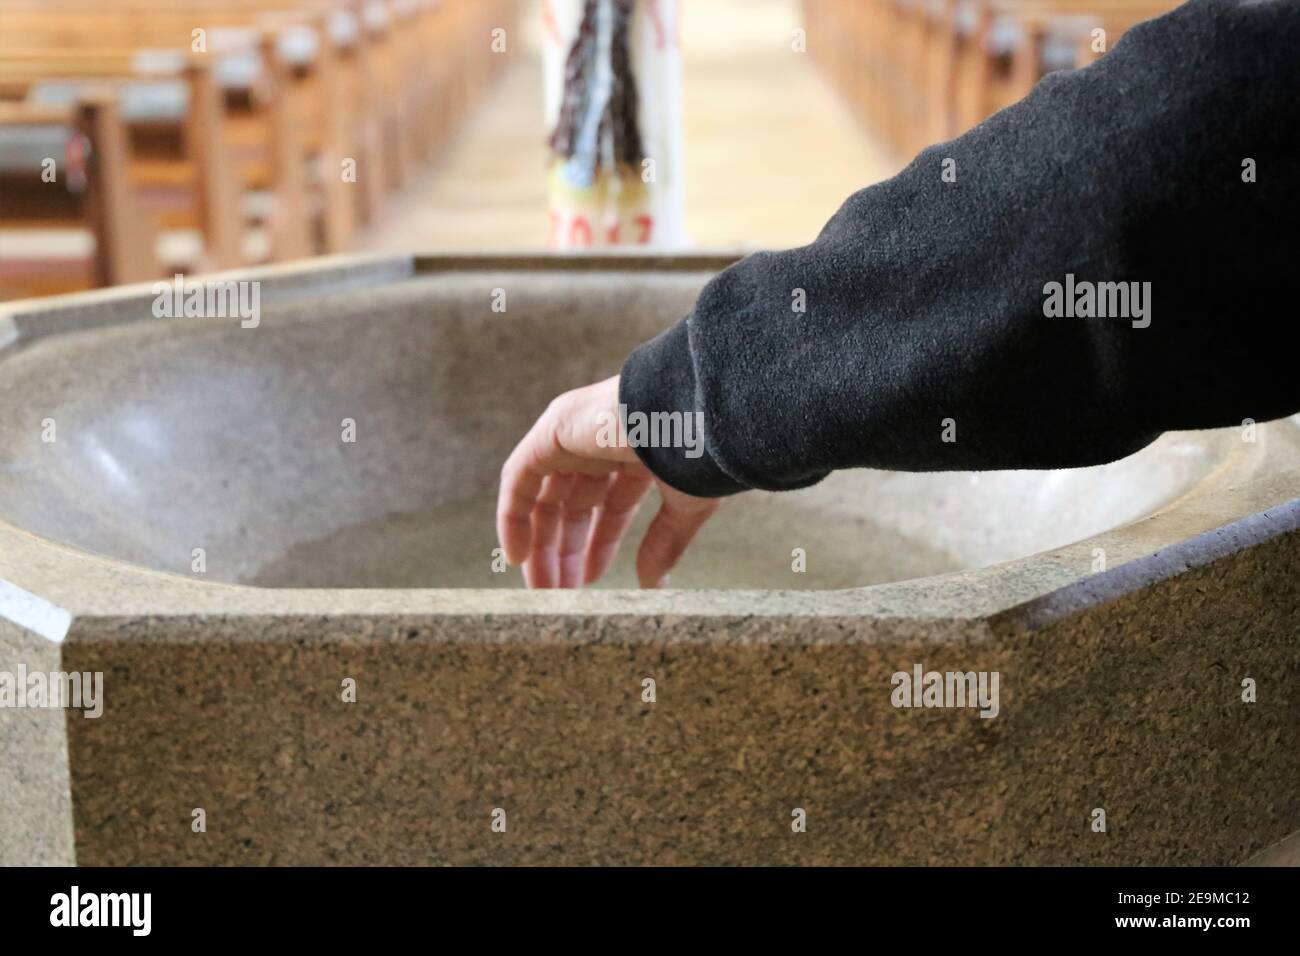 Symbol image: Hand in holy water Stock Photo